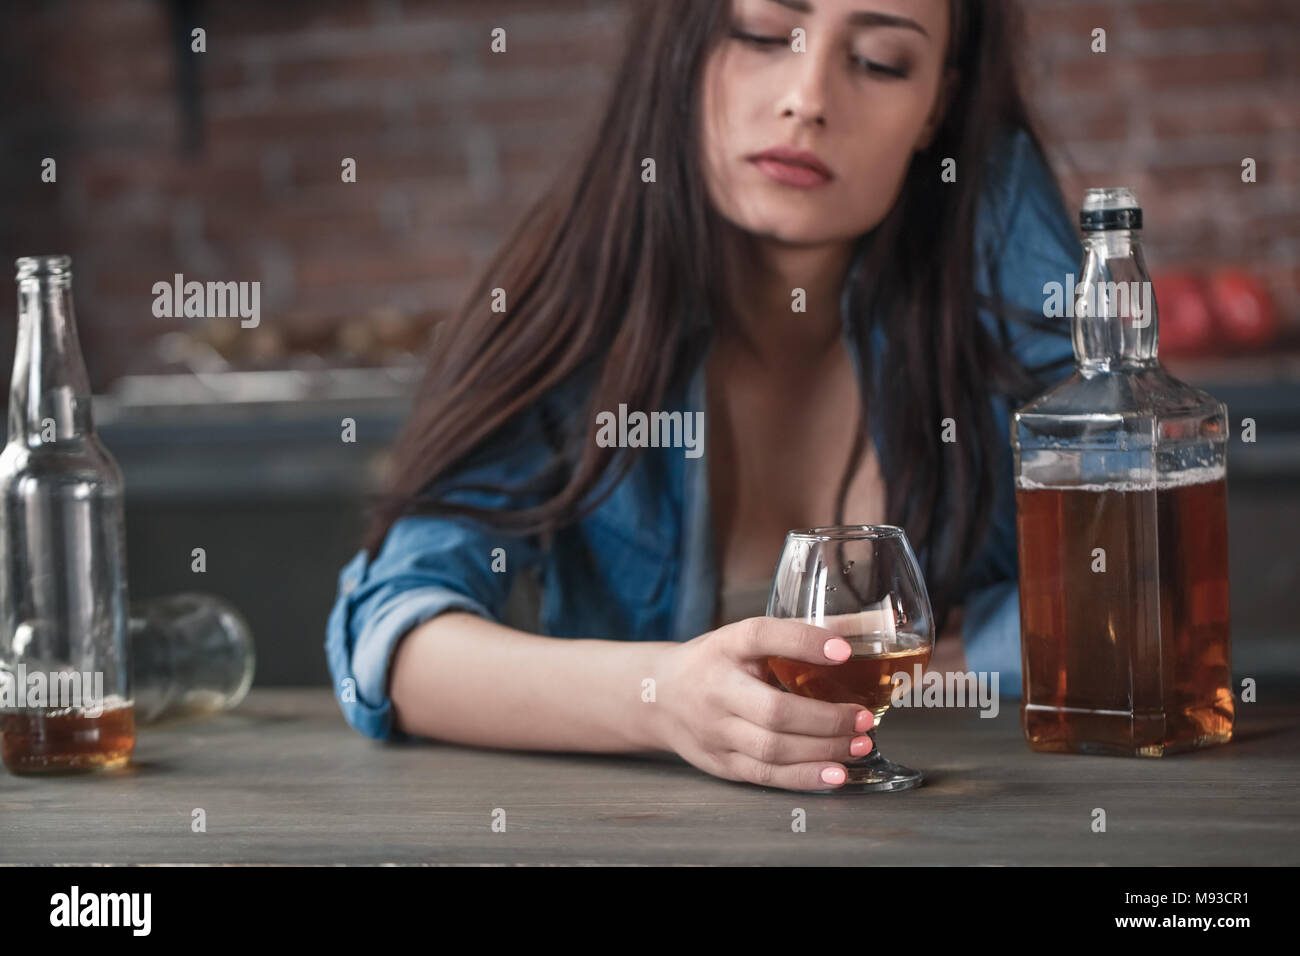 Young female alcoholic social problems sitting at table drinking whiskey holding glass looking down upset close-up Stock Photo